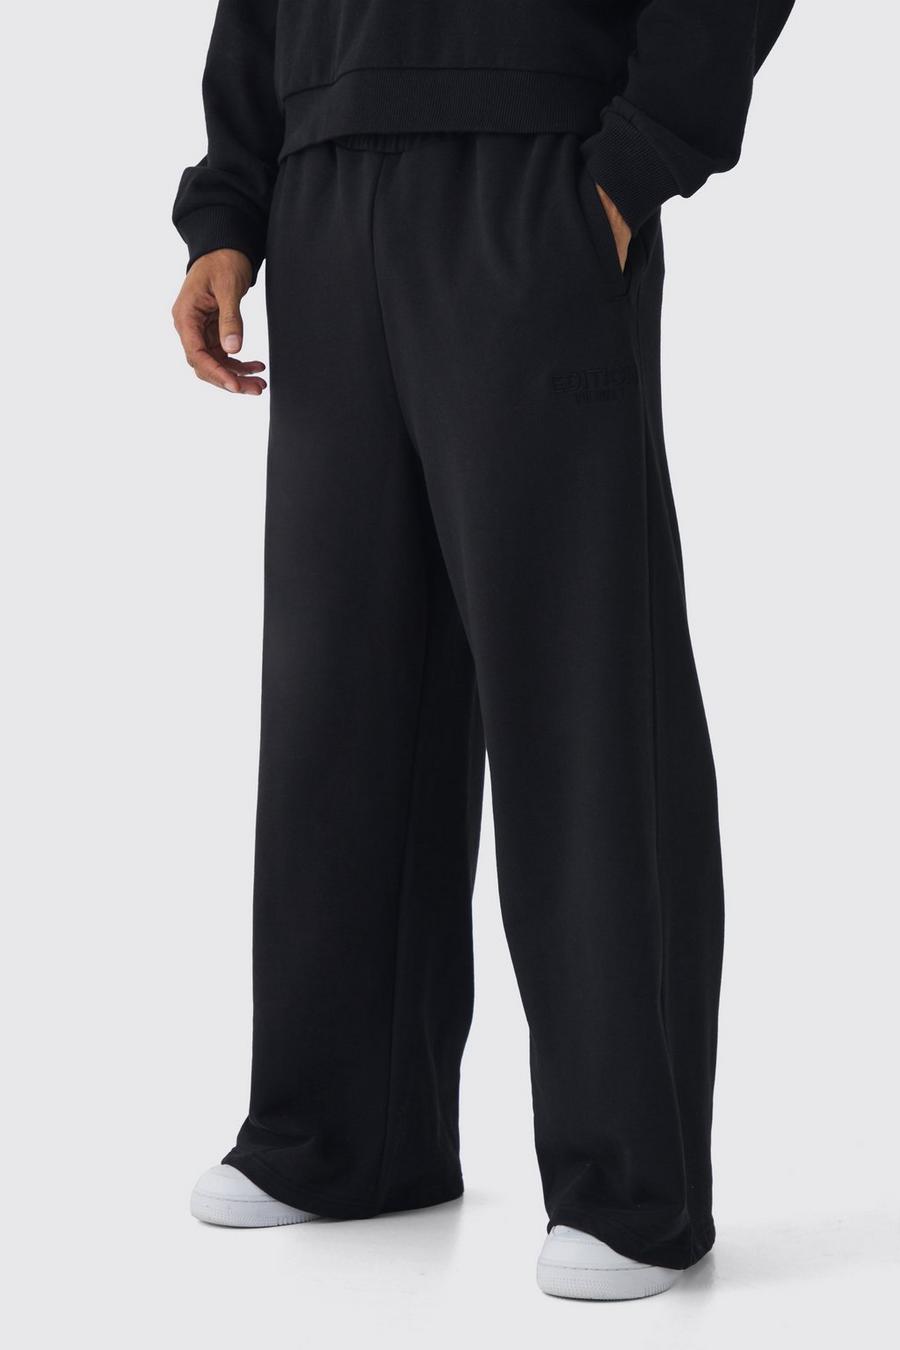 Black Edition Extreme Wide Leg Heavyweight Sweatpants image number 1